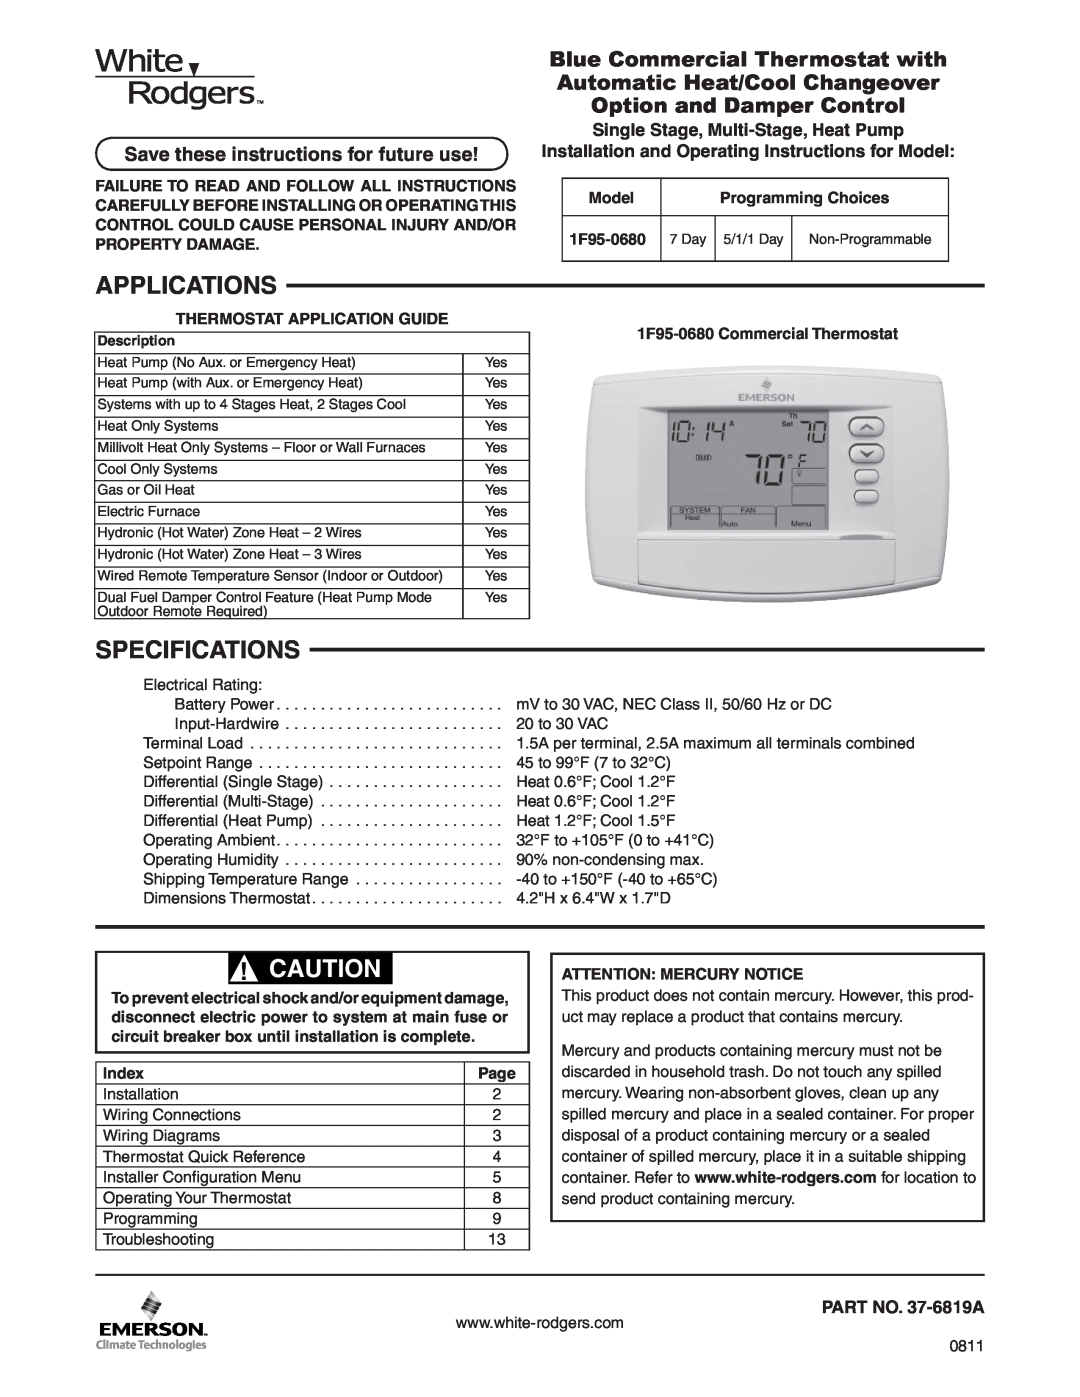 White Rodgers 1F95-0680 specifications Applications, Specifications, Save these instructions for future use, Model, Index 